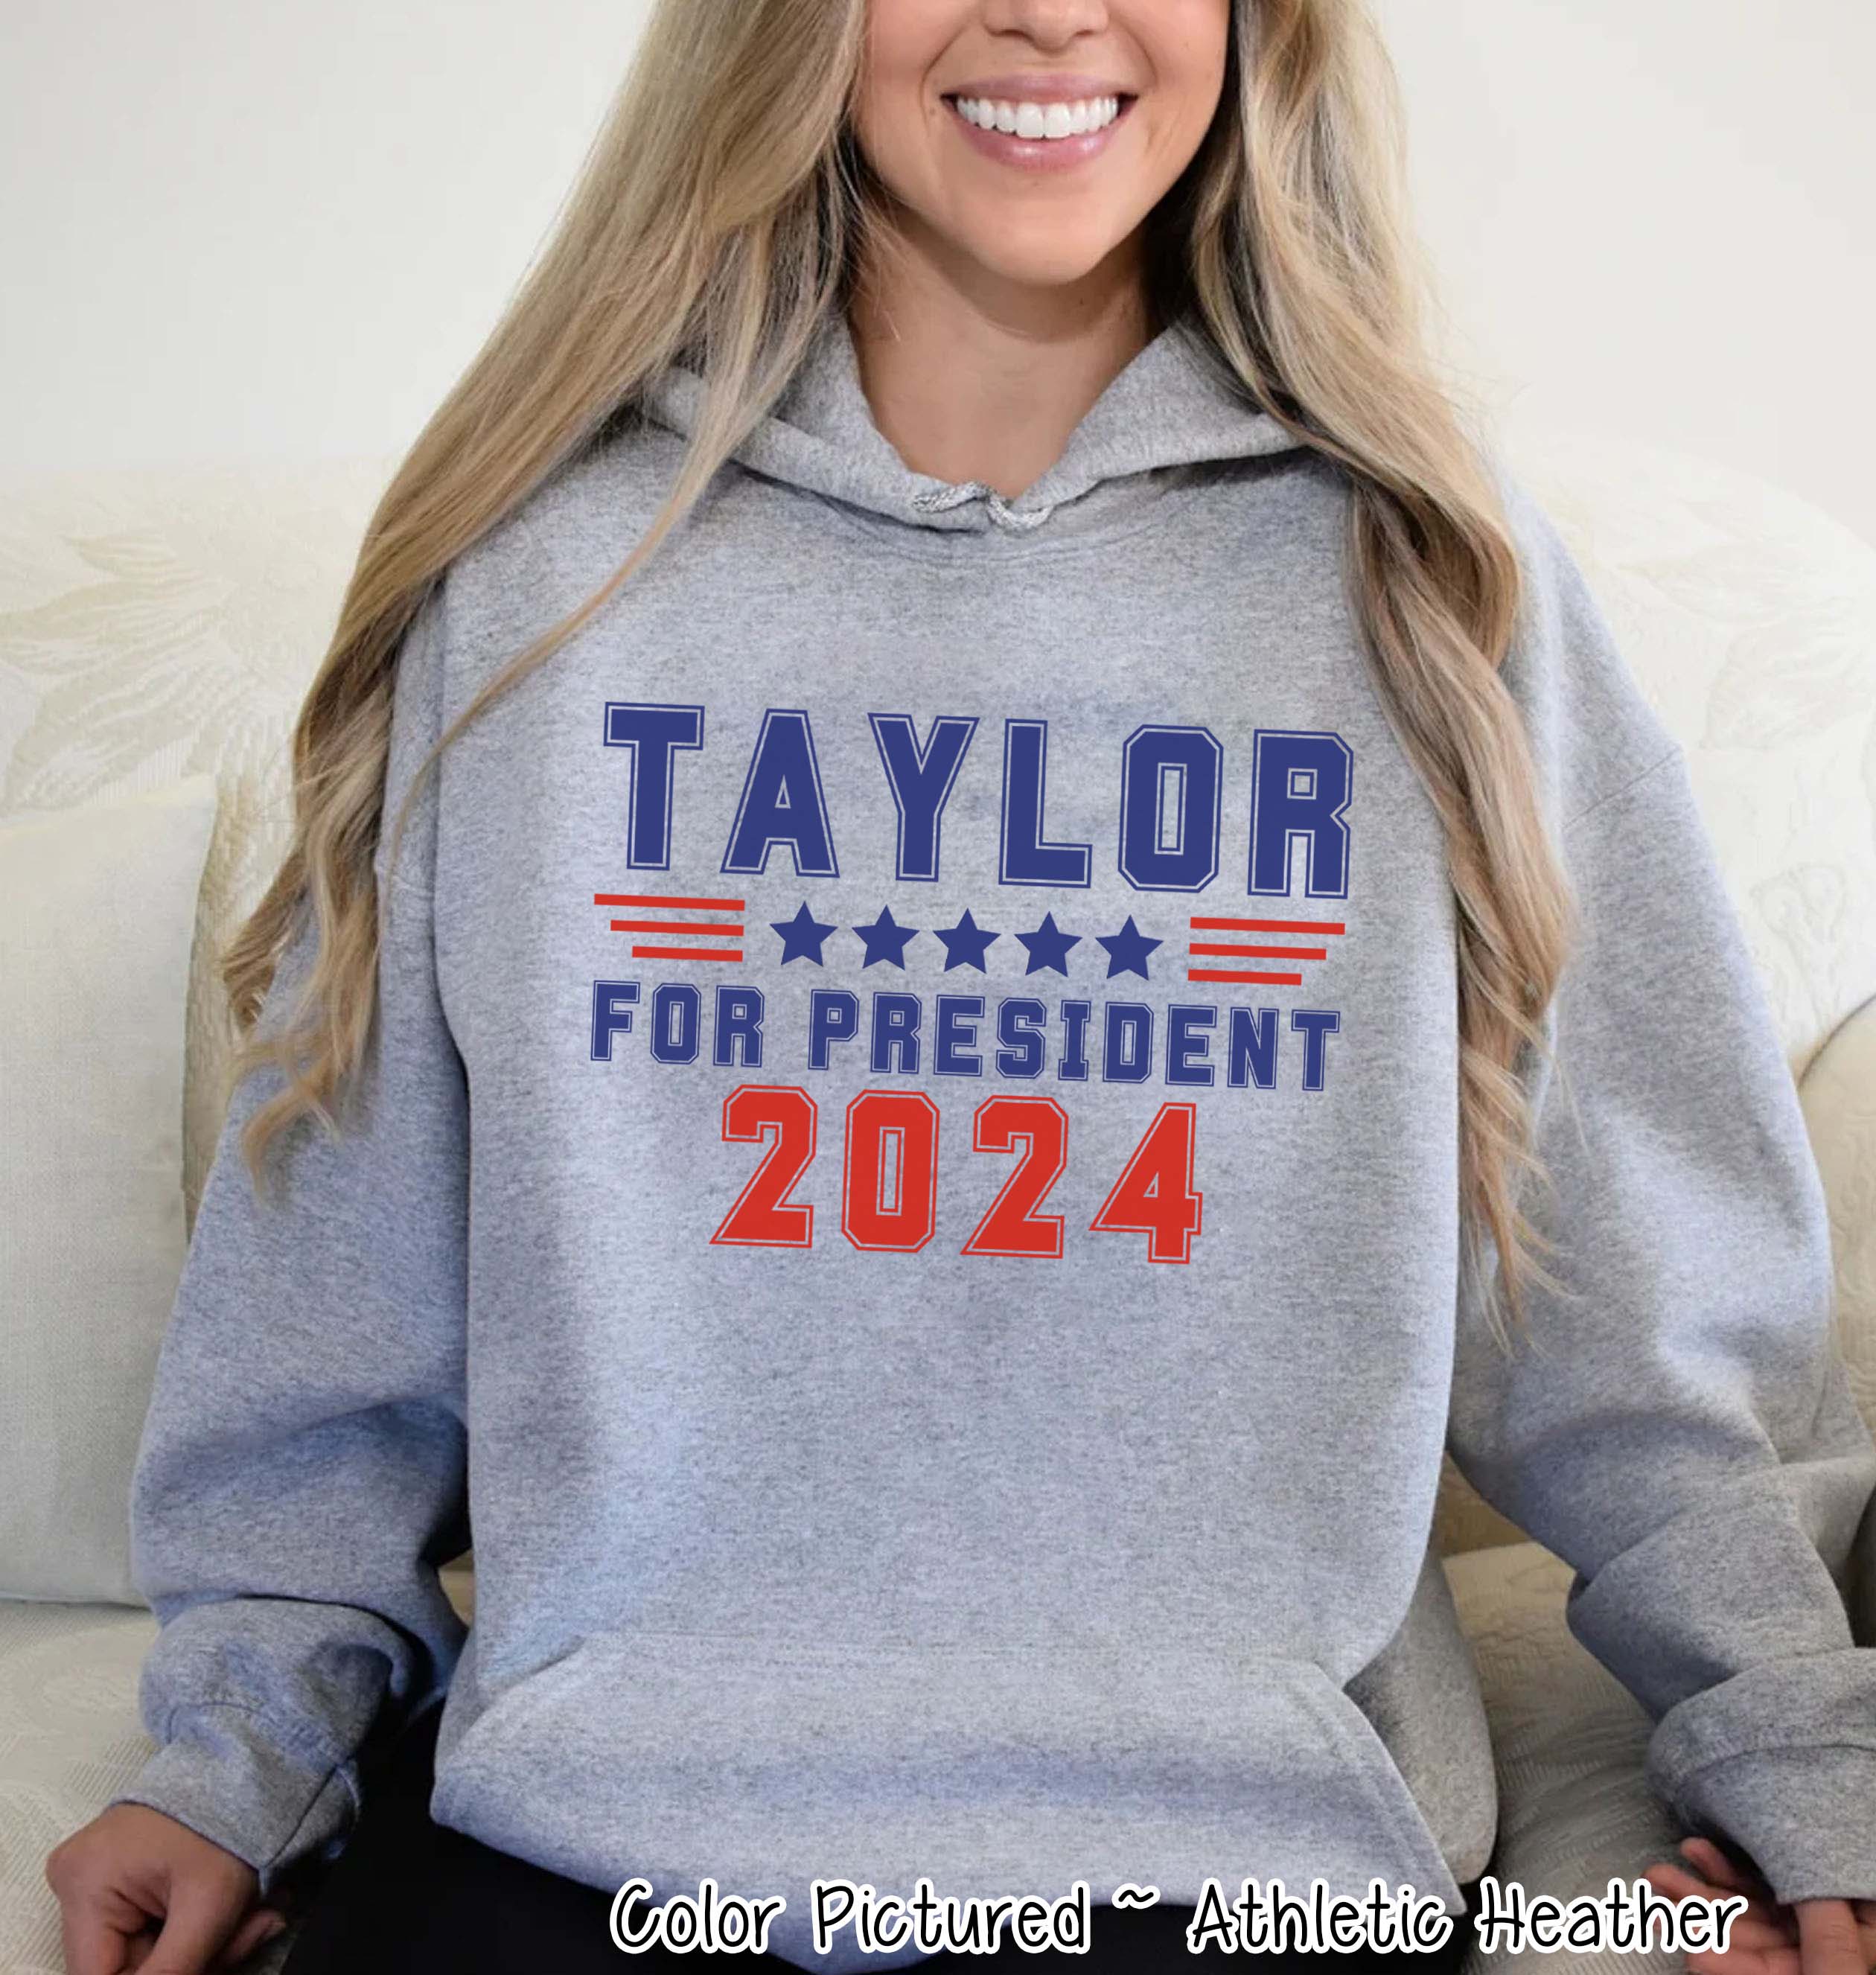 Taylor Swift for President Funny Political Tee or Sweatshirt